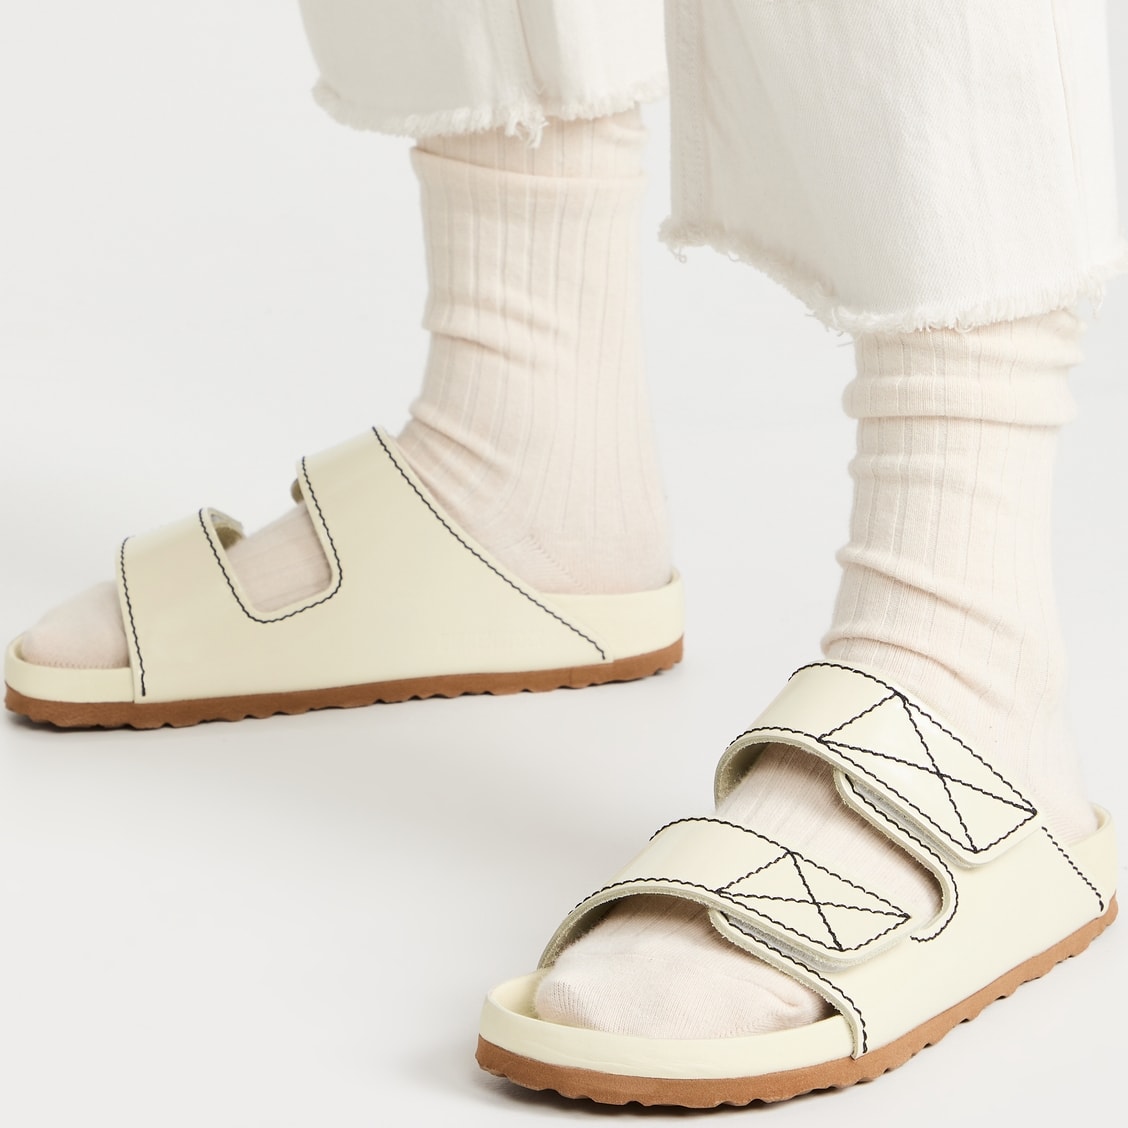 A reimagined pair of Birkenstock's classic Arizona sandals made in collaboration with Proenza Schouler